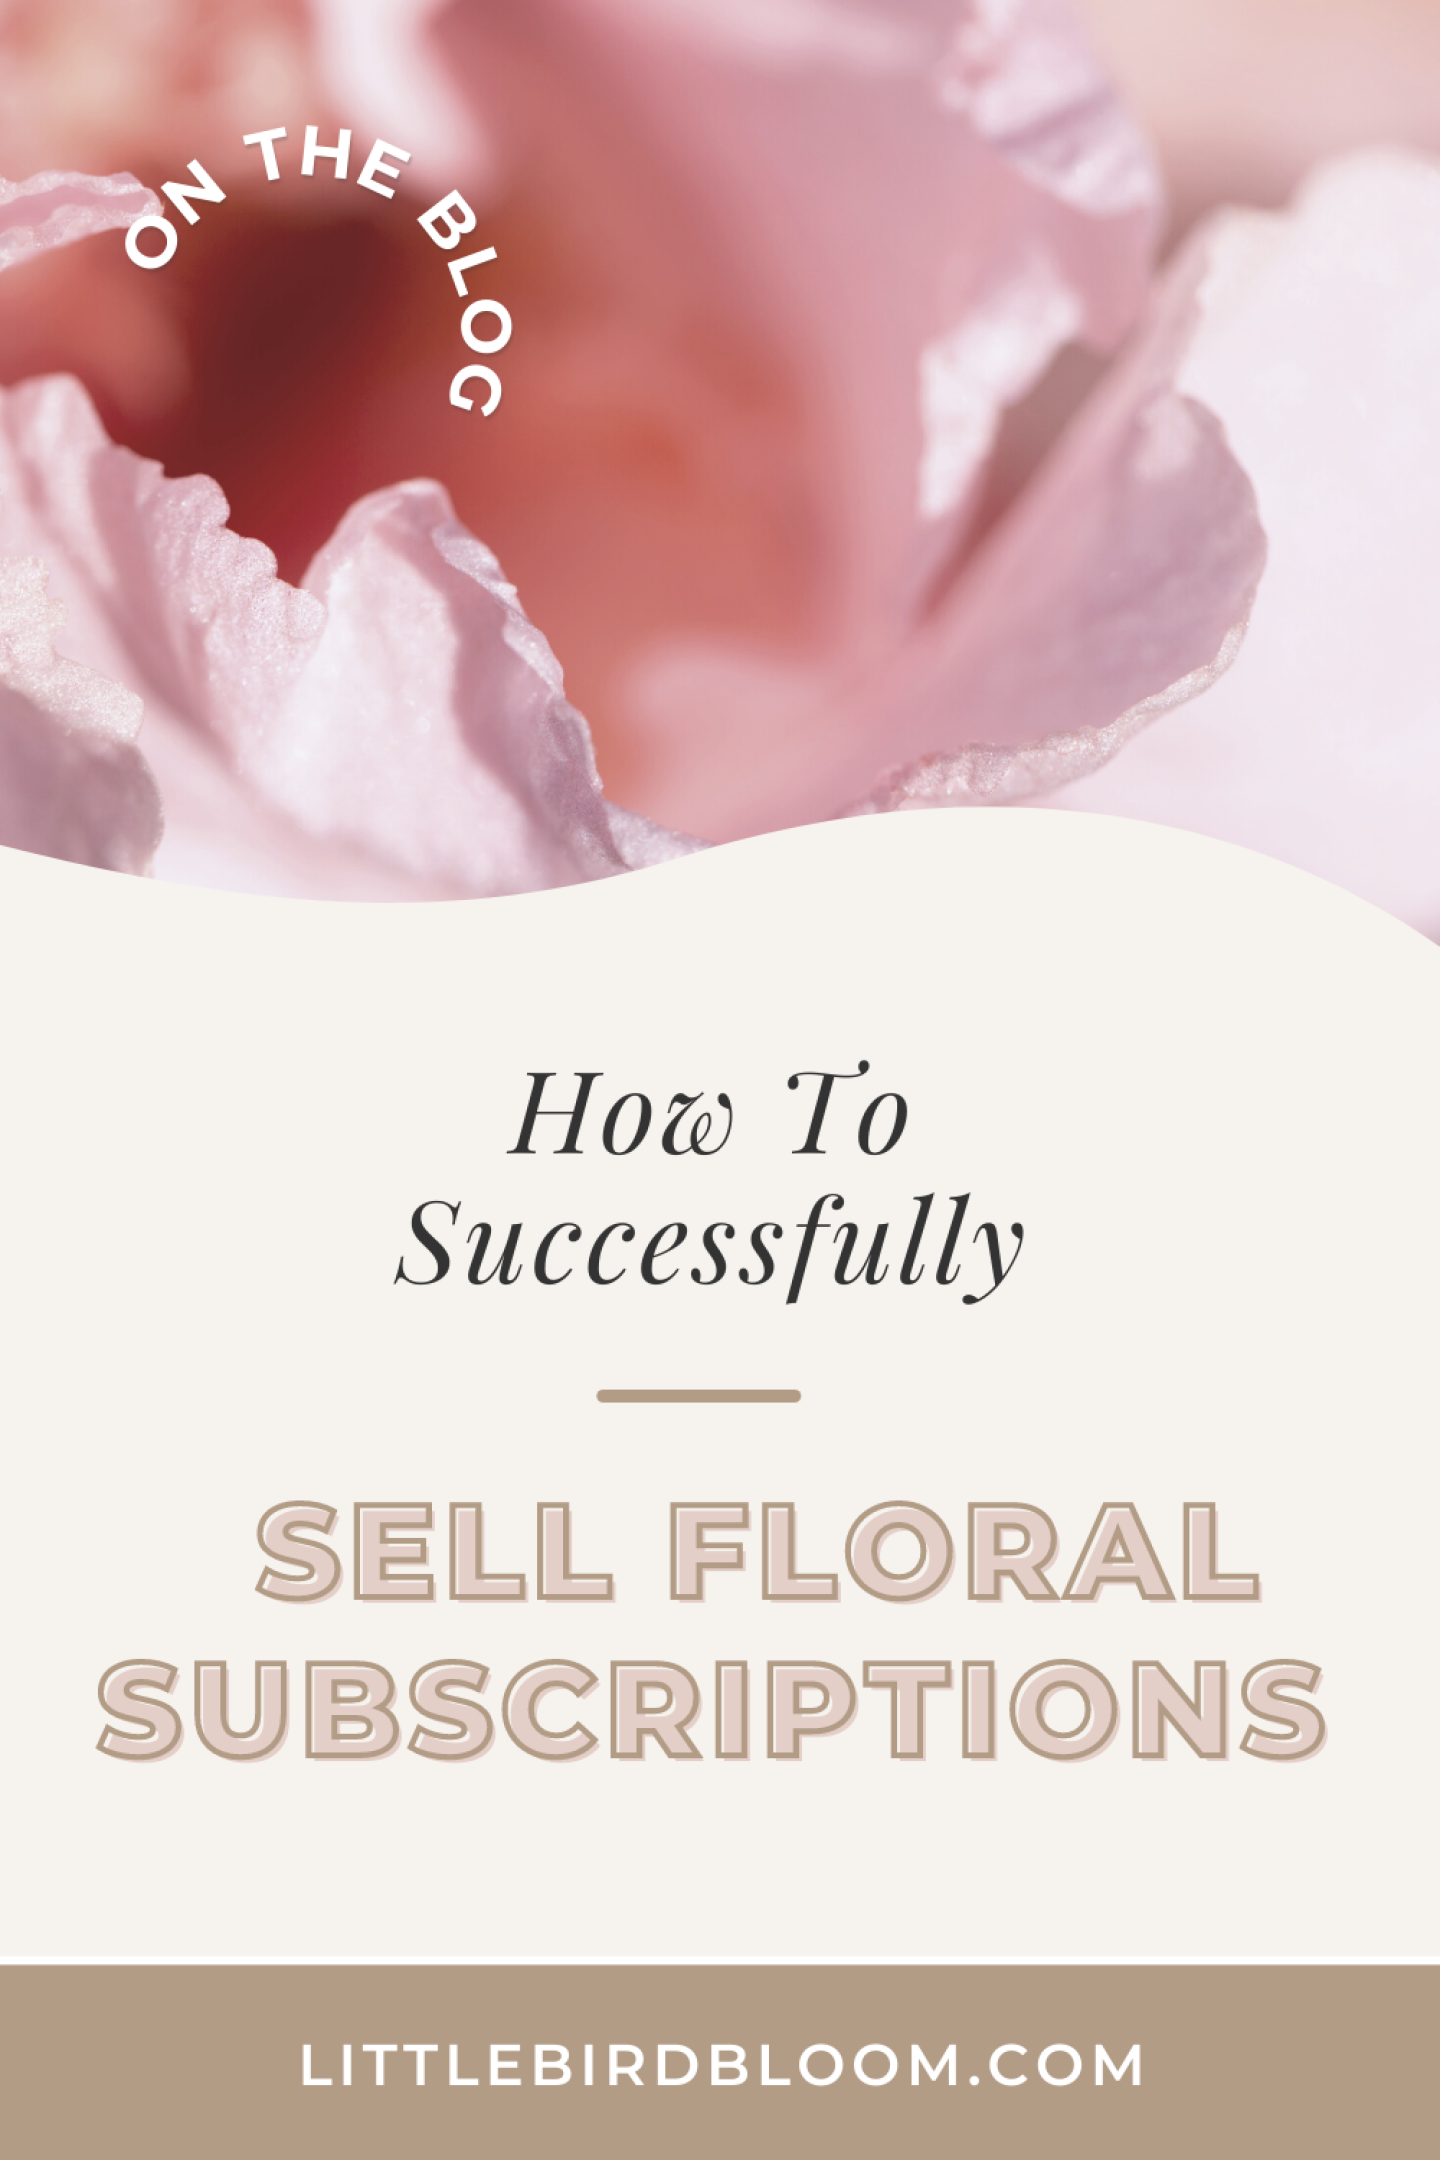 How to Sell Floral Subscriptions in 2022